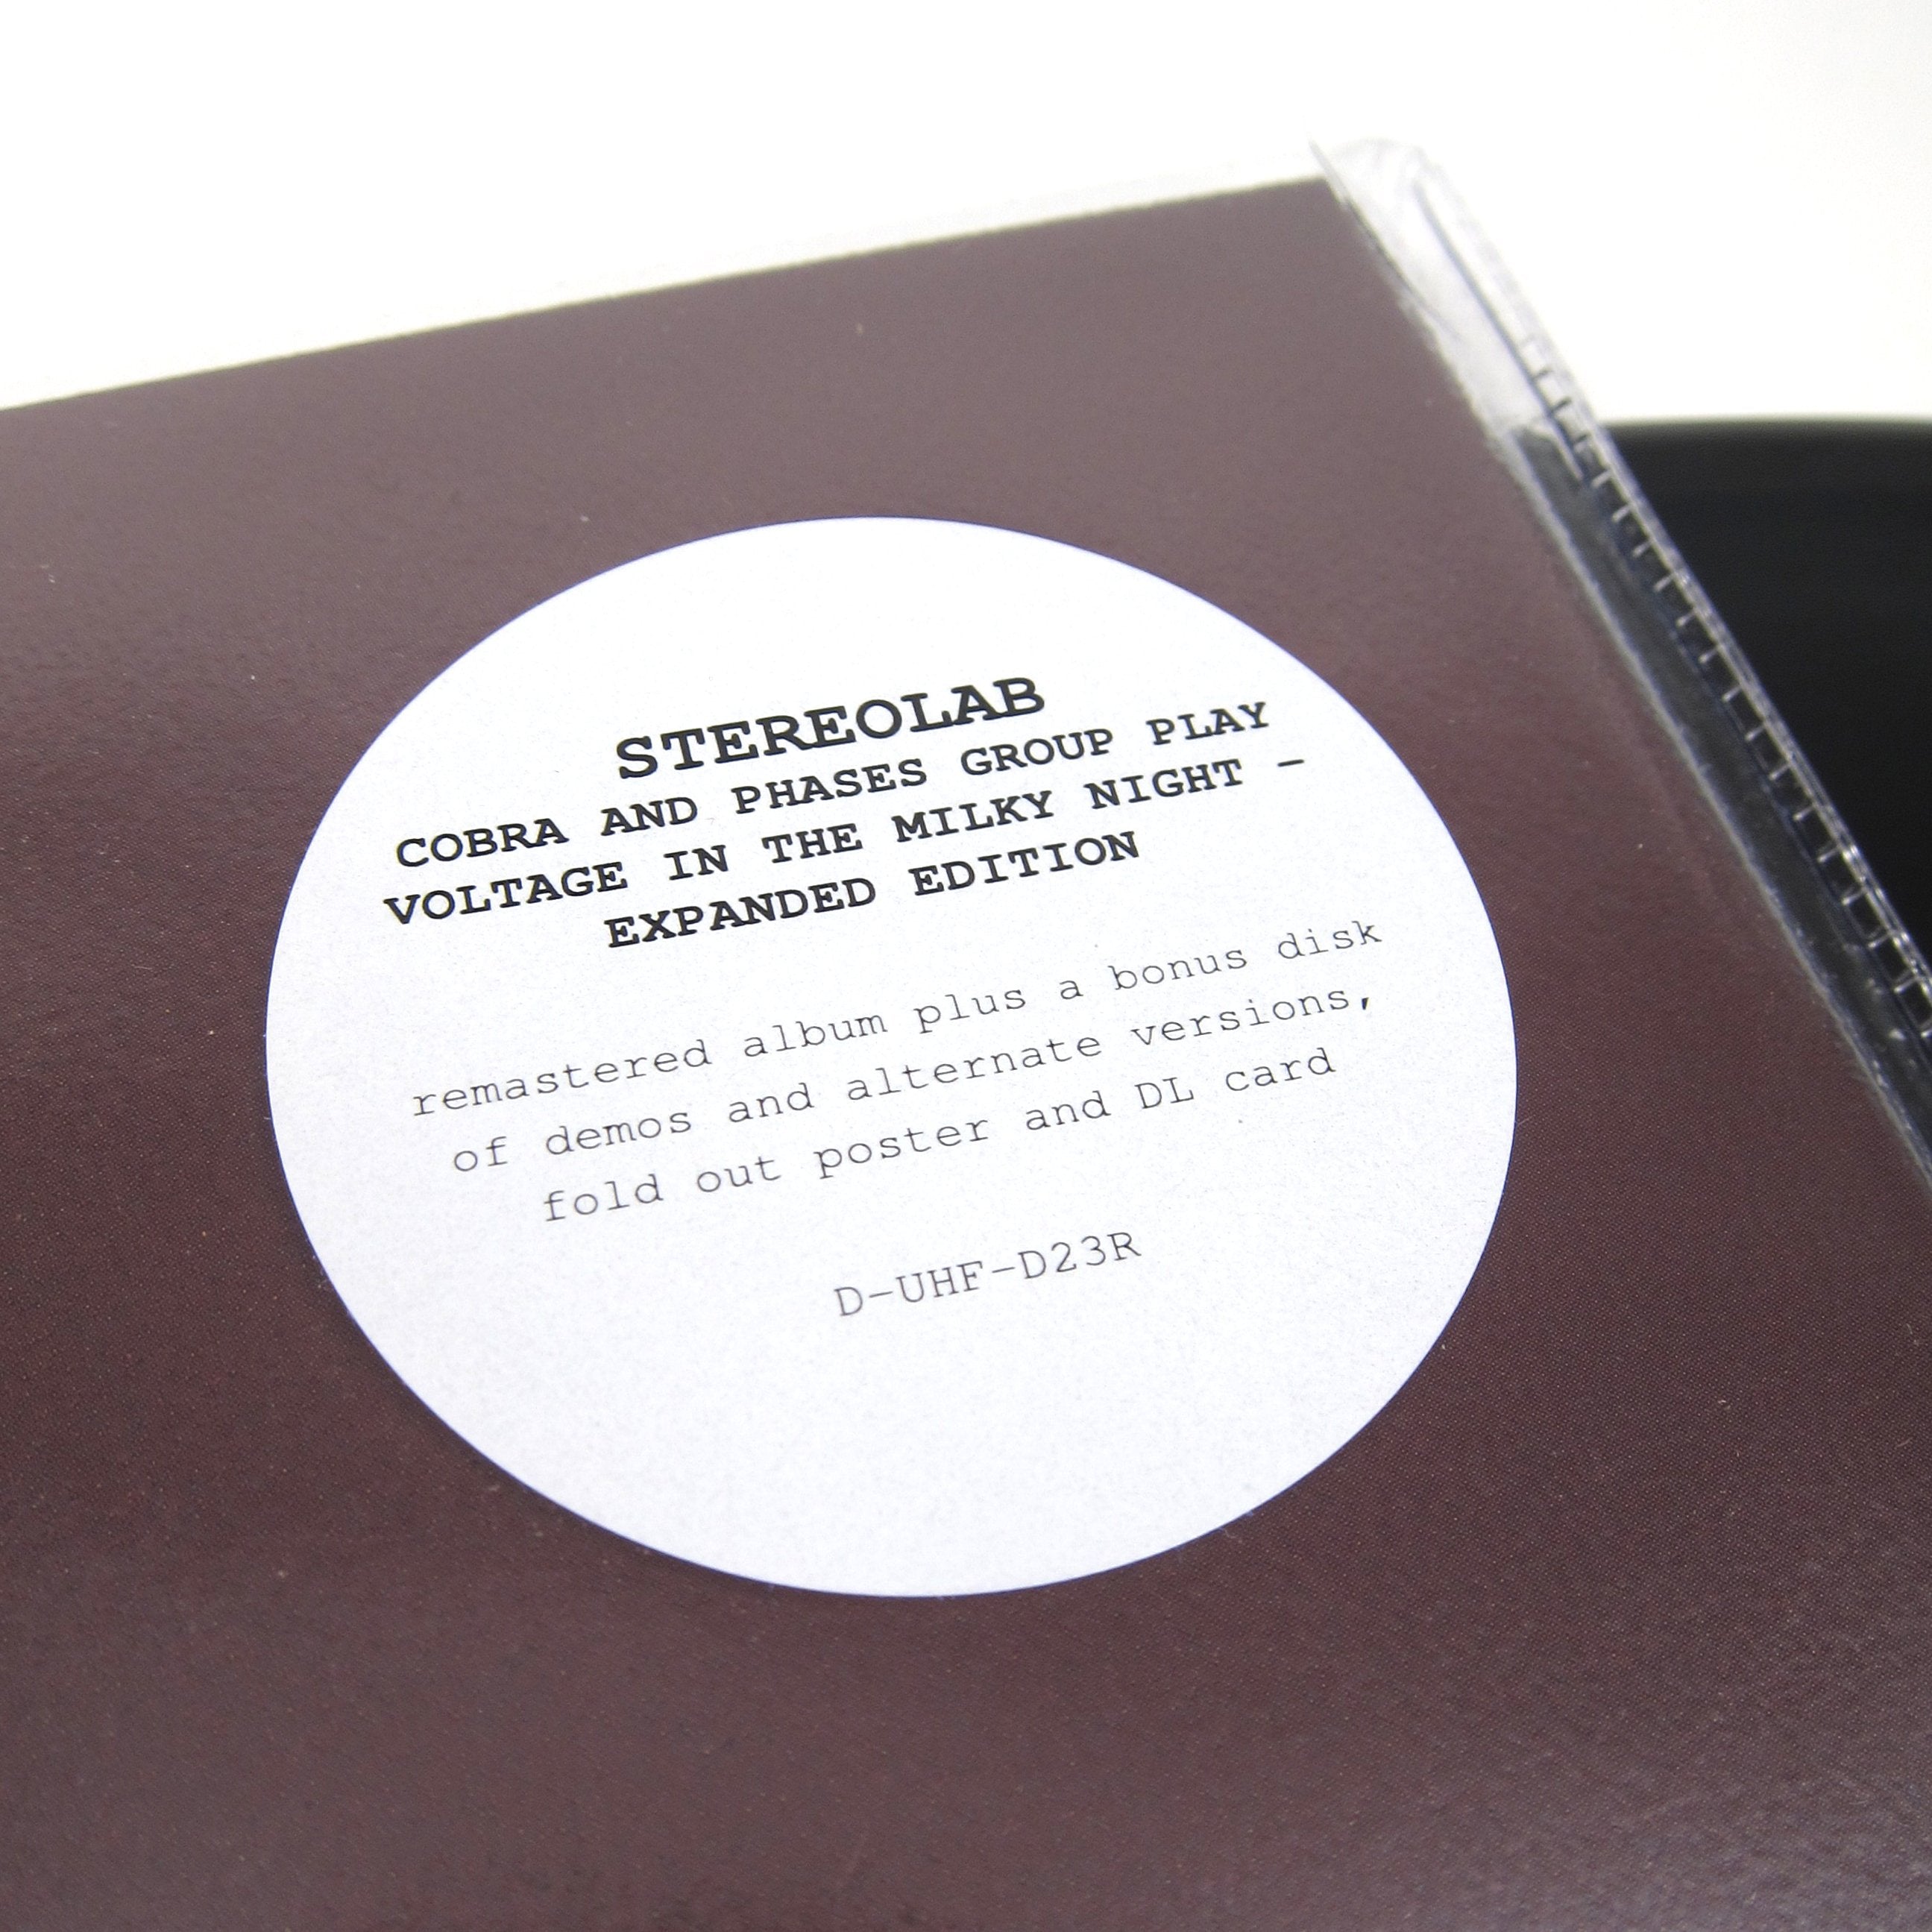 Stereolab: Cobra And Phases Group Play Voltage In The Milky Night Vinyl 3LP